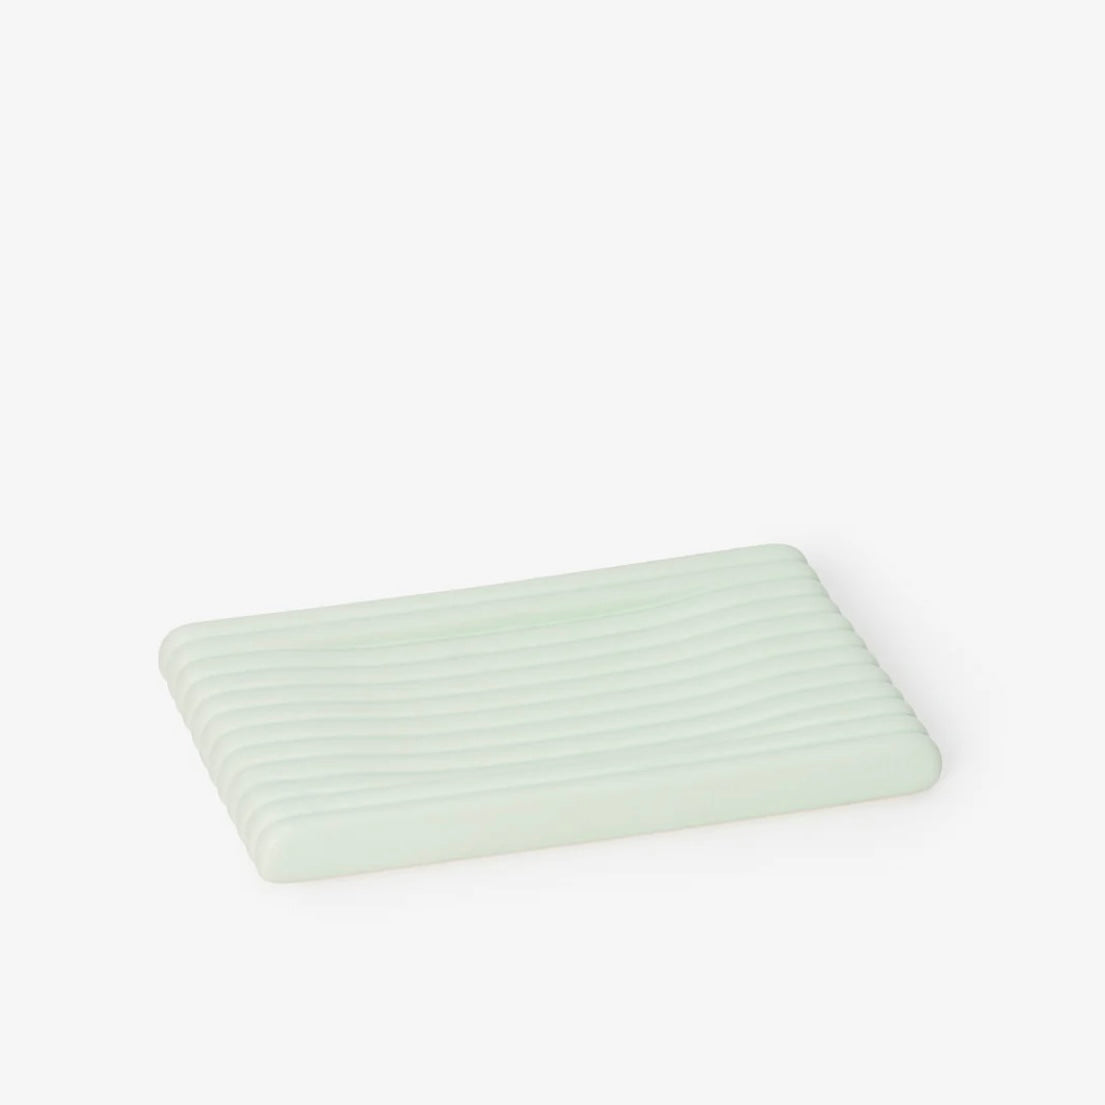 Helen Levi for Areaware Corduroy Sink Tray